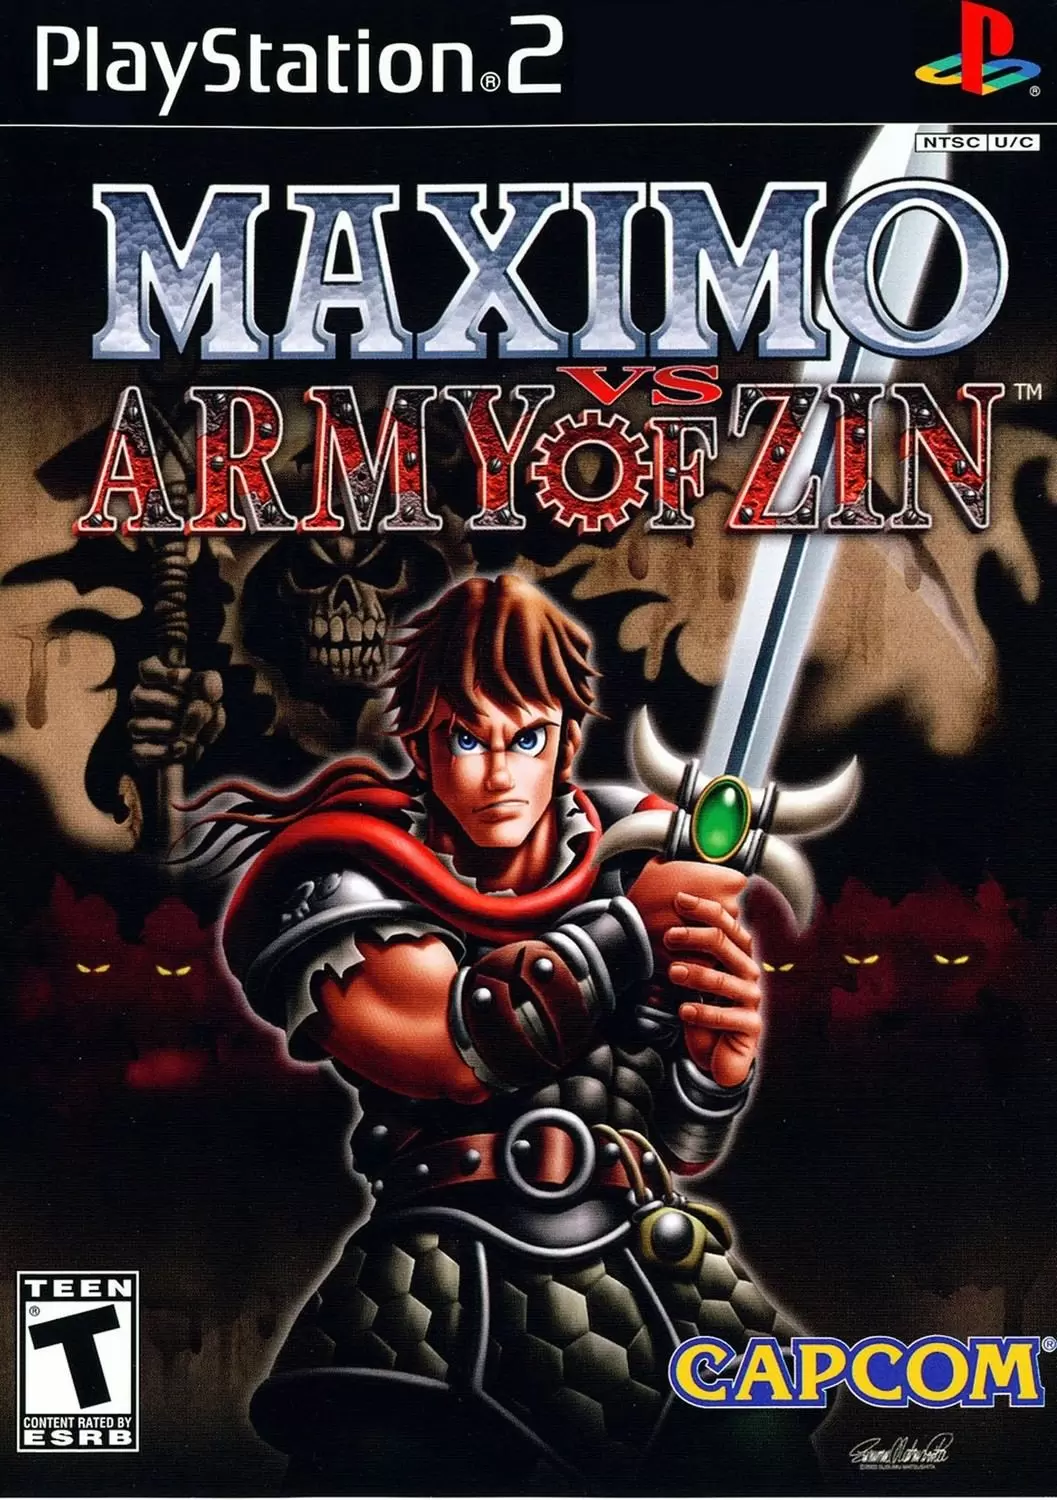 PS2 Games - Maximo vs. Army of Zin